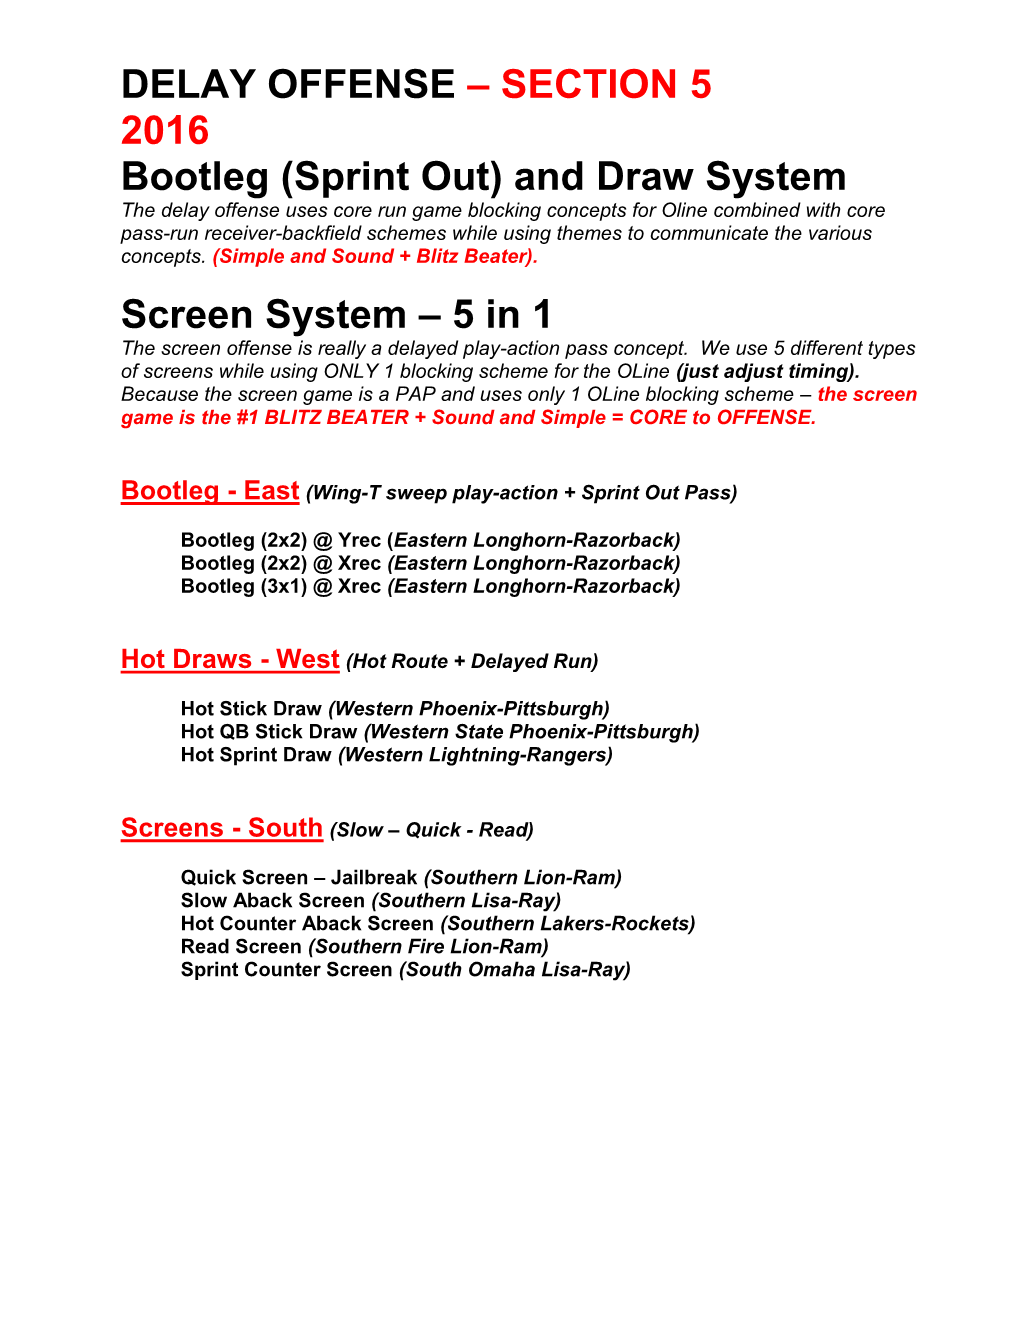 DELAY OFFENSE – SECTION 5 2016 Bootleg (Sprint Out) and Draw System Screen System